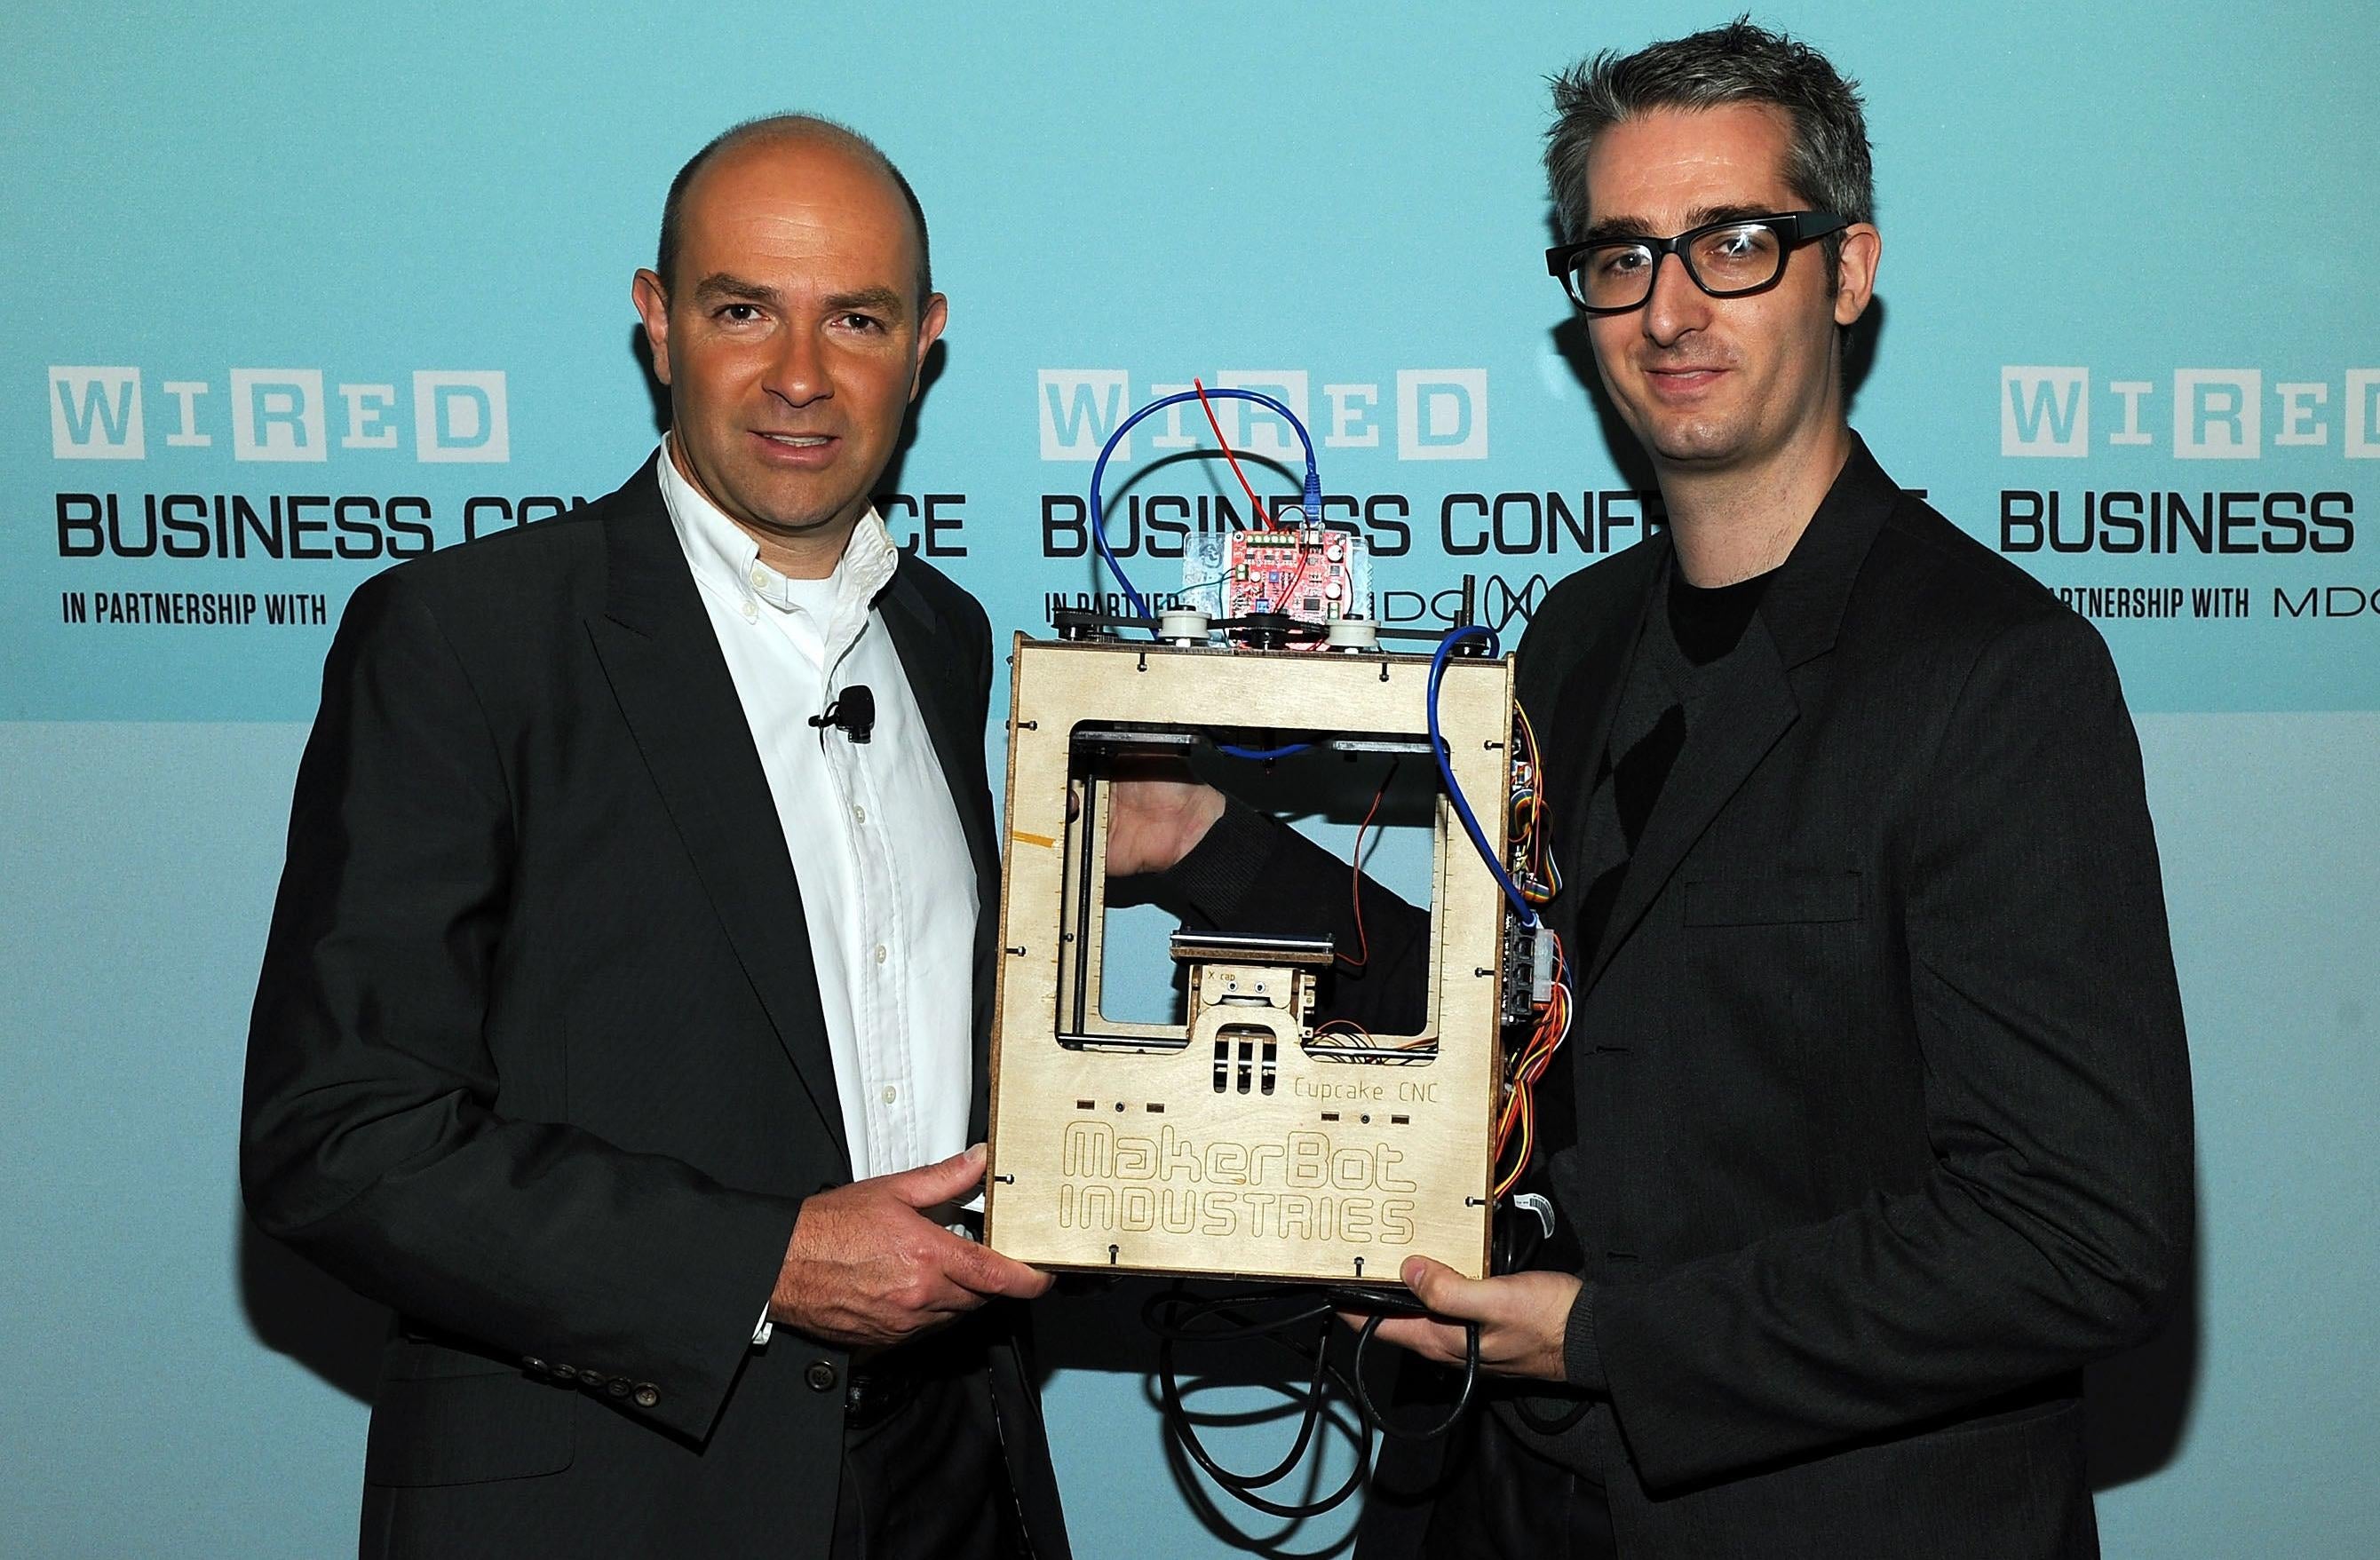 Cofounder of MakerBot Industries Bre Pettis shows off the MakerBot Cupcake CNC at a Wired conference in 2010. (Photo: Getty, Getty Images)